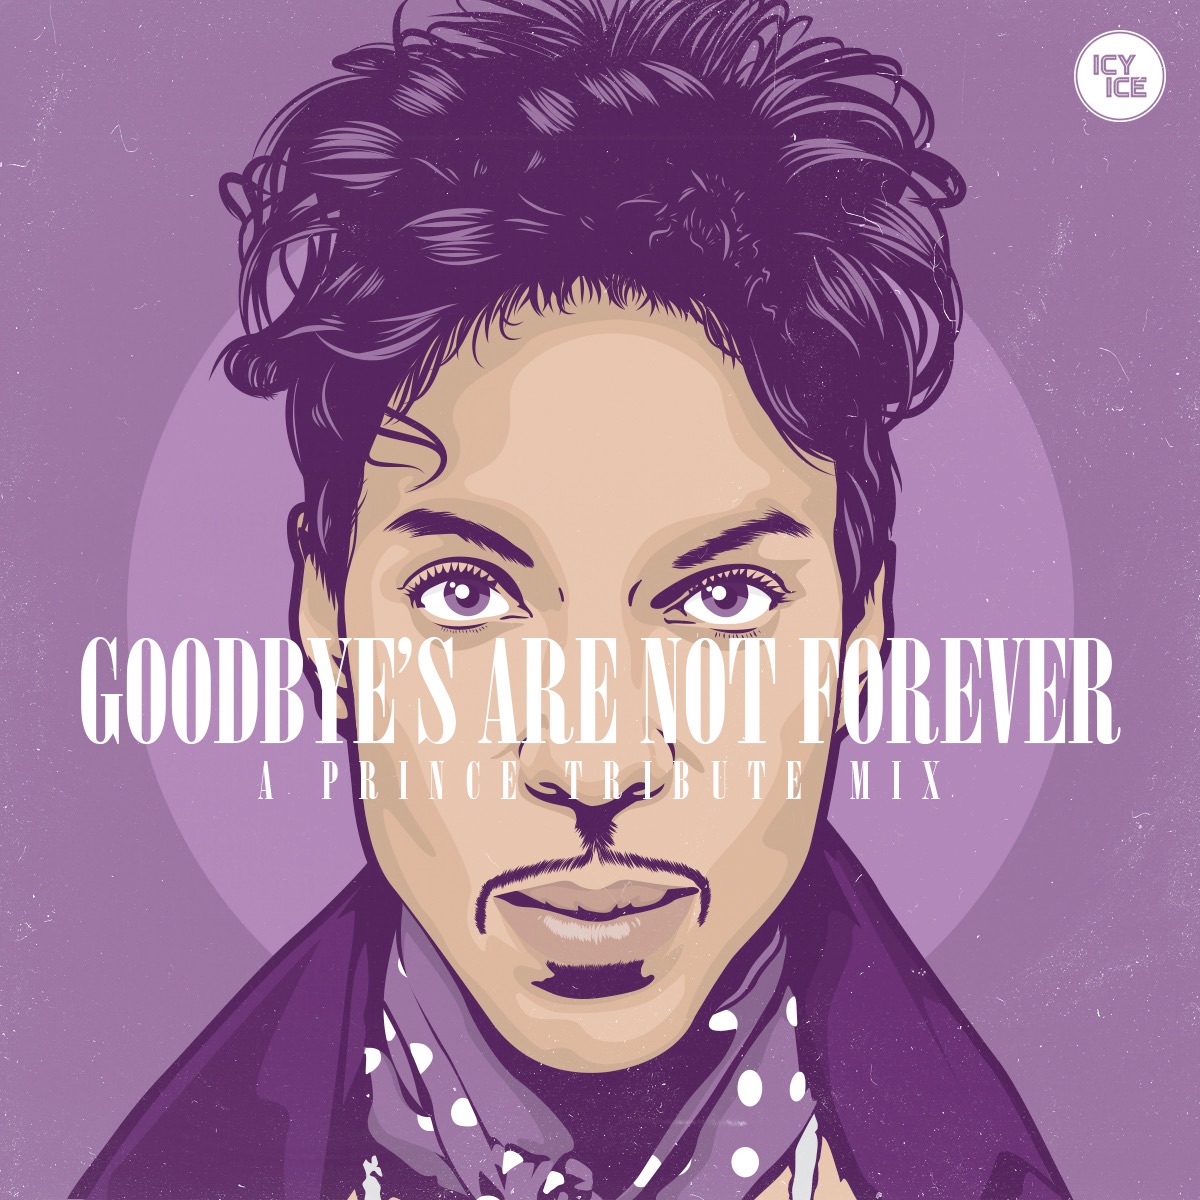 Prince Tribute by DJ Icy Ice